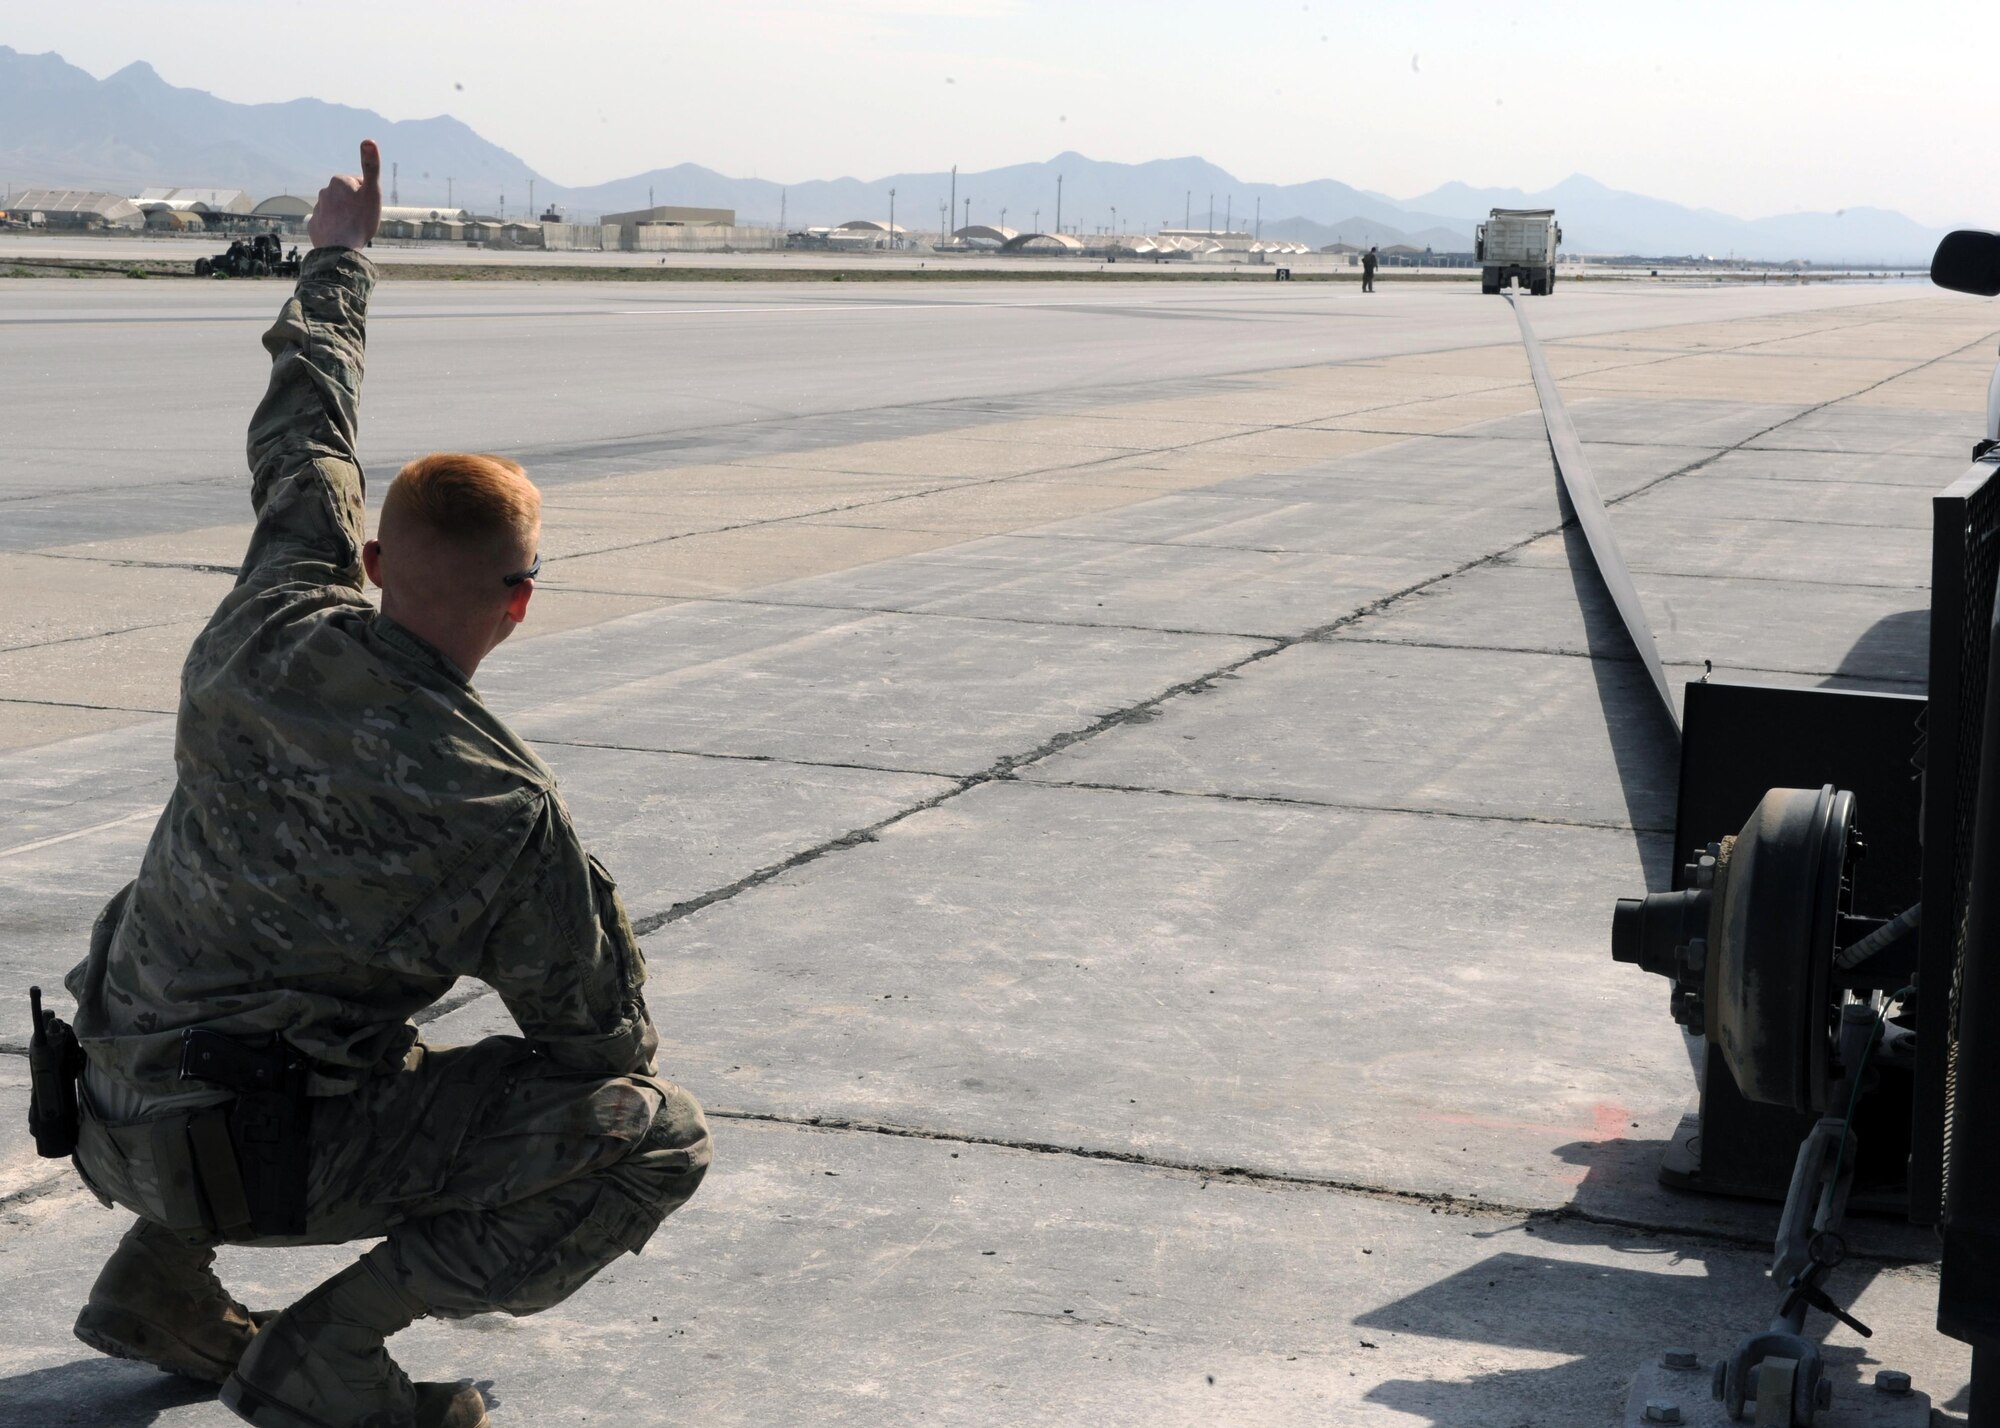 U.S. Air Force Senior Airman Bodin Rasbeck, 455th Expeditionary Civil Engineer Squadron power production journeyman, gives the thumbs up to indicate a successful test of a Mobile Aircraft Arresting System March 18, 2015 at Bagram Airfield, Afghanistan. The MAAS was from a separate taxiway as part of the construction of an alternate runway at Bagram. (U.S. Air Force photo by Staff Sgt. Whitney Amstutz/released)